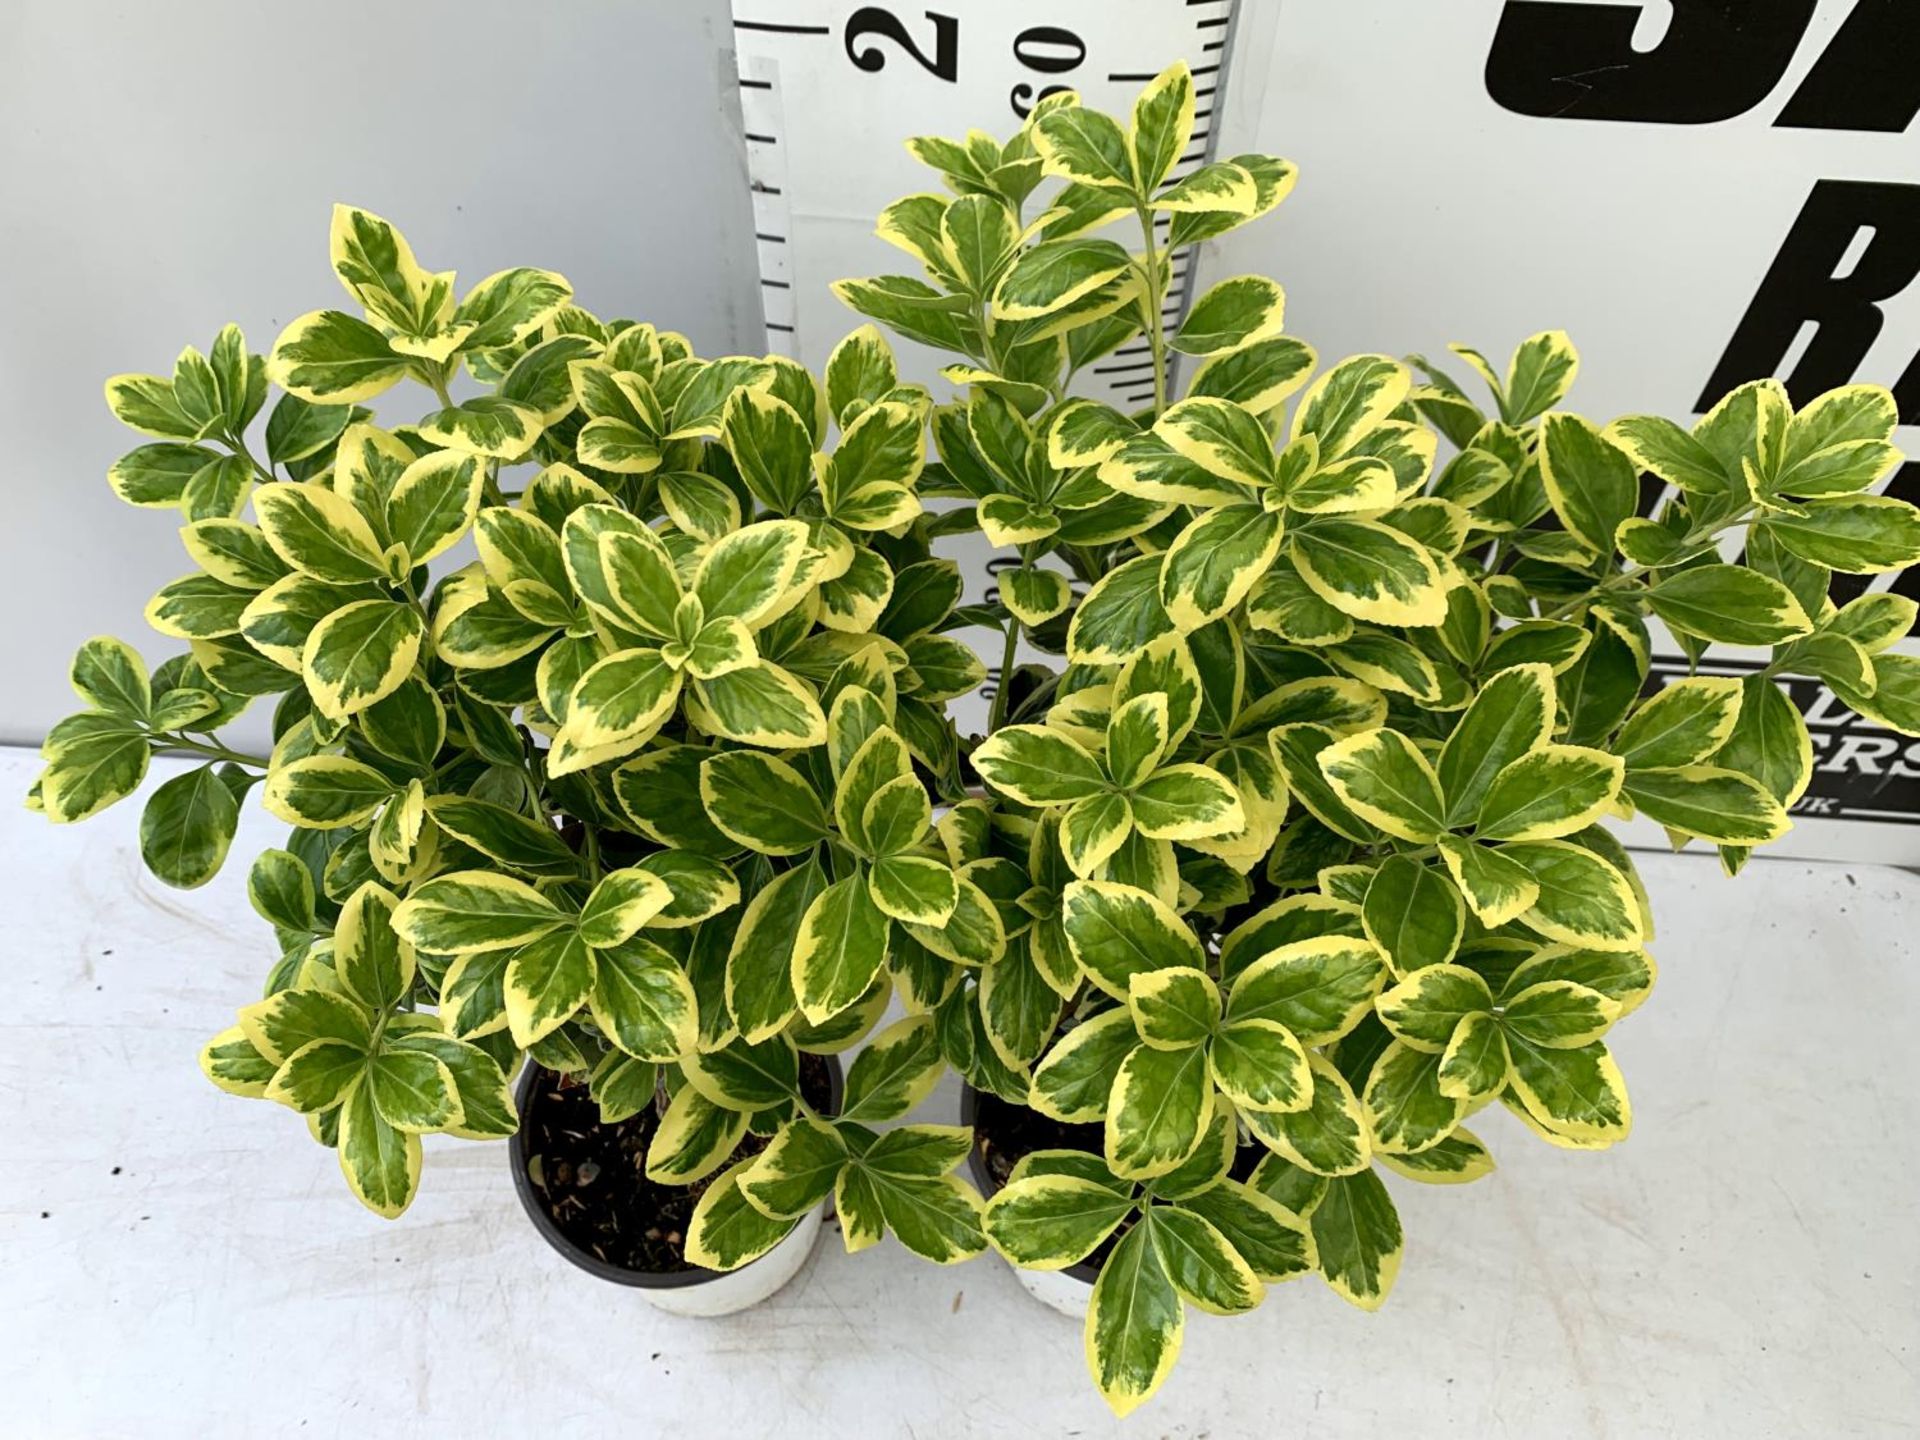 TWO EUONYMUS JAPONICUS STANDARD TREES APPROX 70CM IN HEIGHT IN 2 LTR POTS PLUS VAT TO BE SOLD FOR - Image 3 of 6